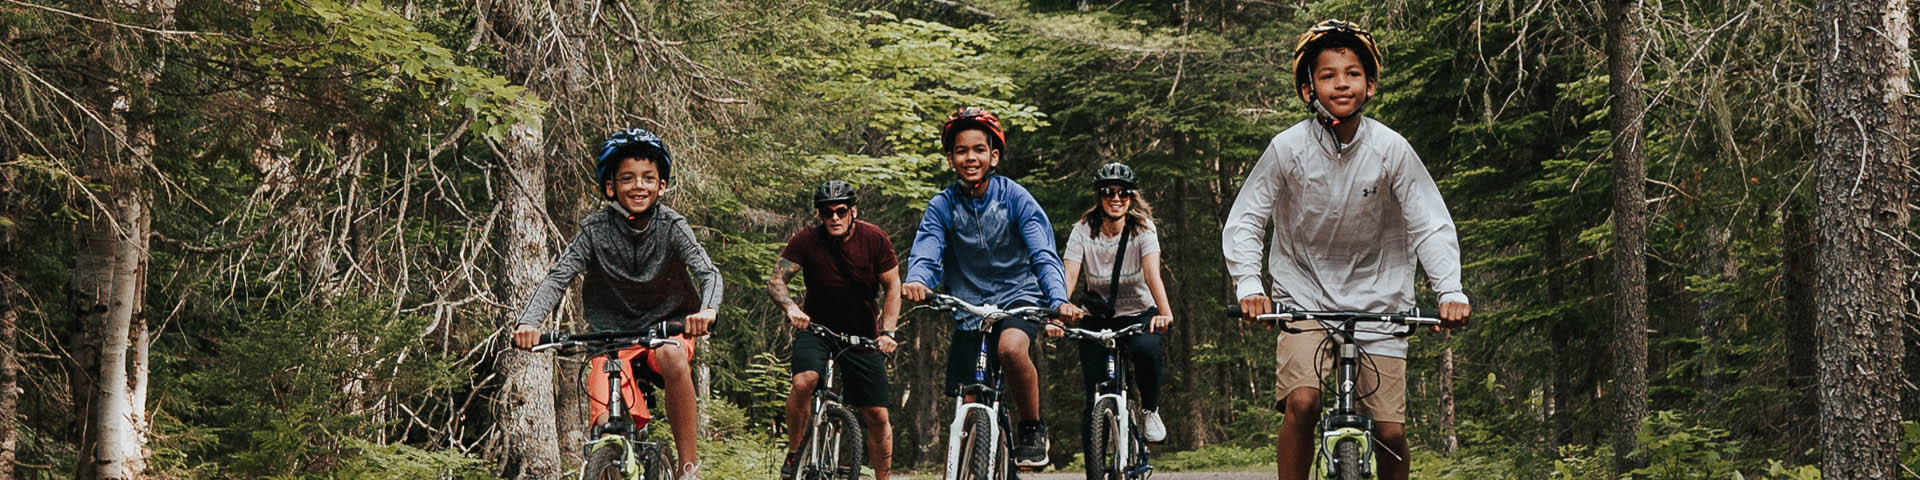 A family cycling on a trail in the forest.